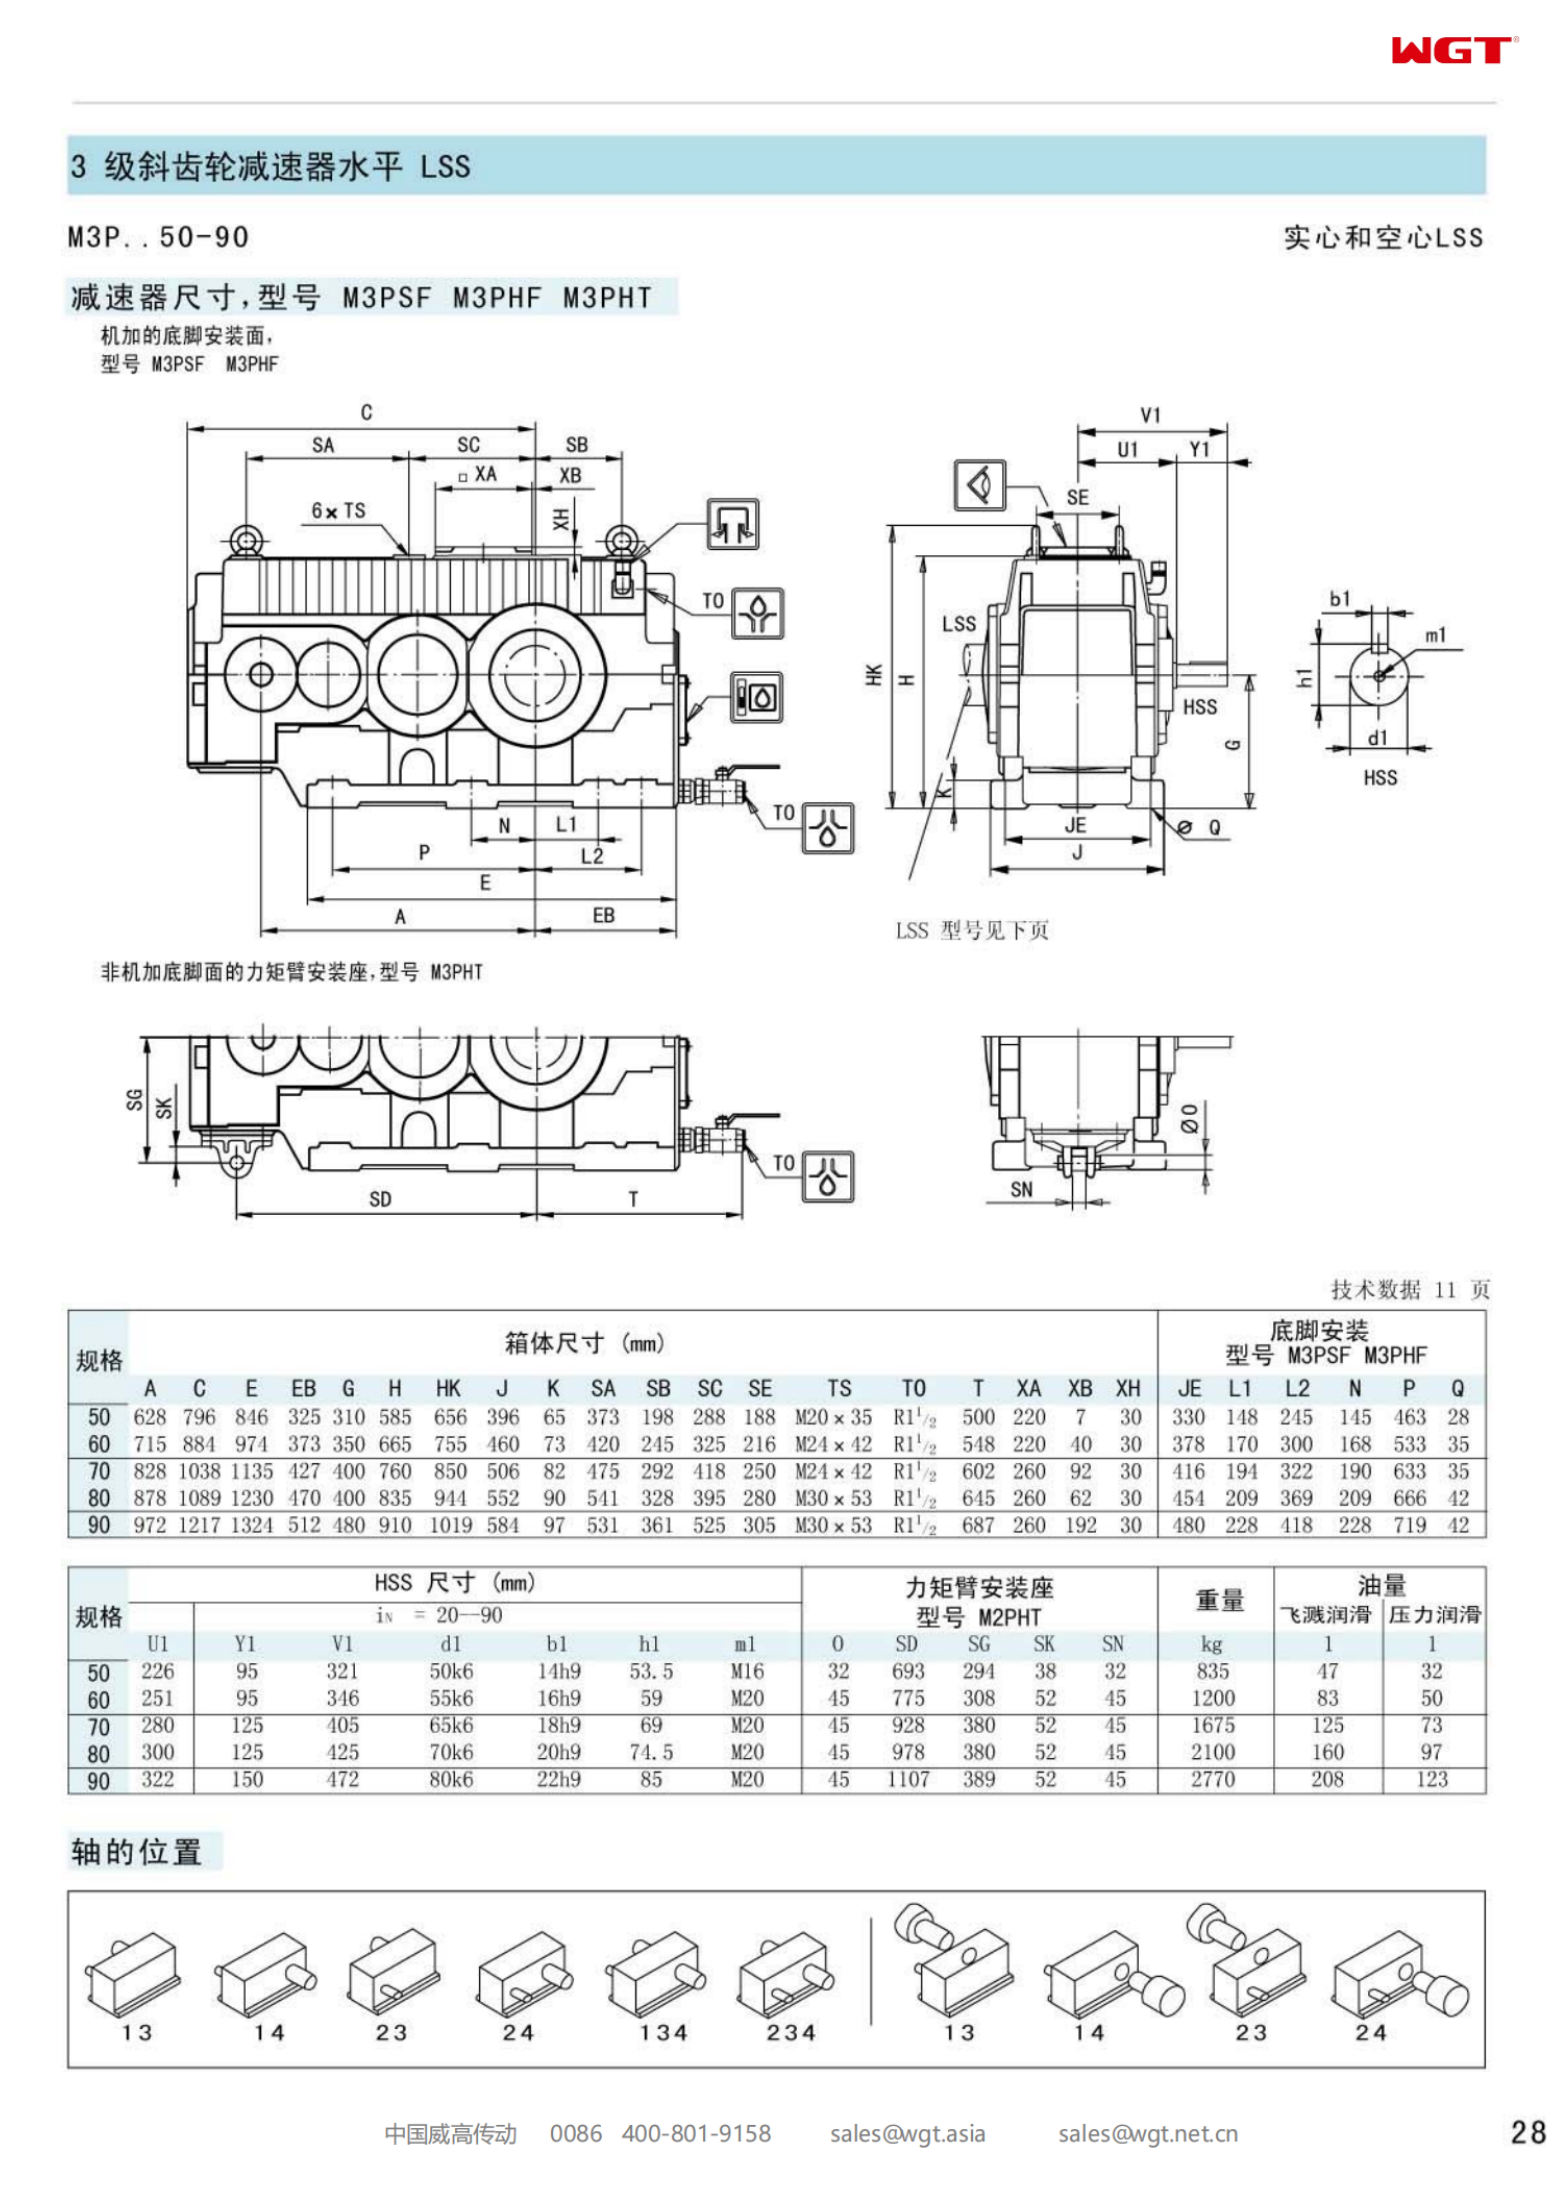 M3PHT50 Replace_SEW_M_Series Gearbox